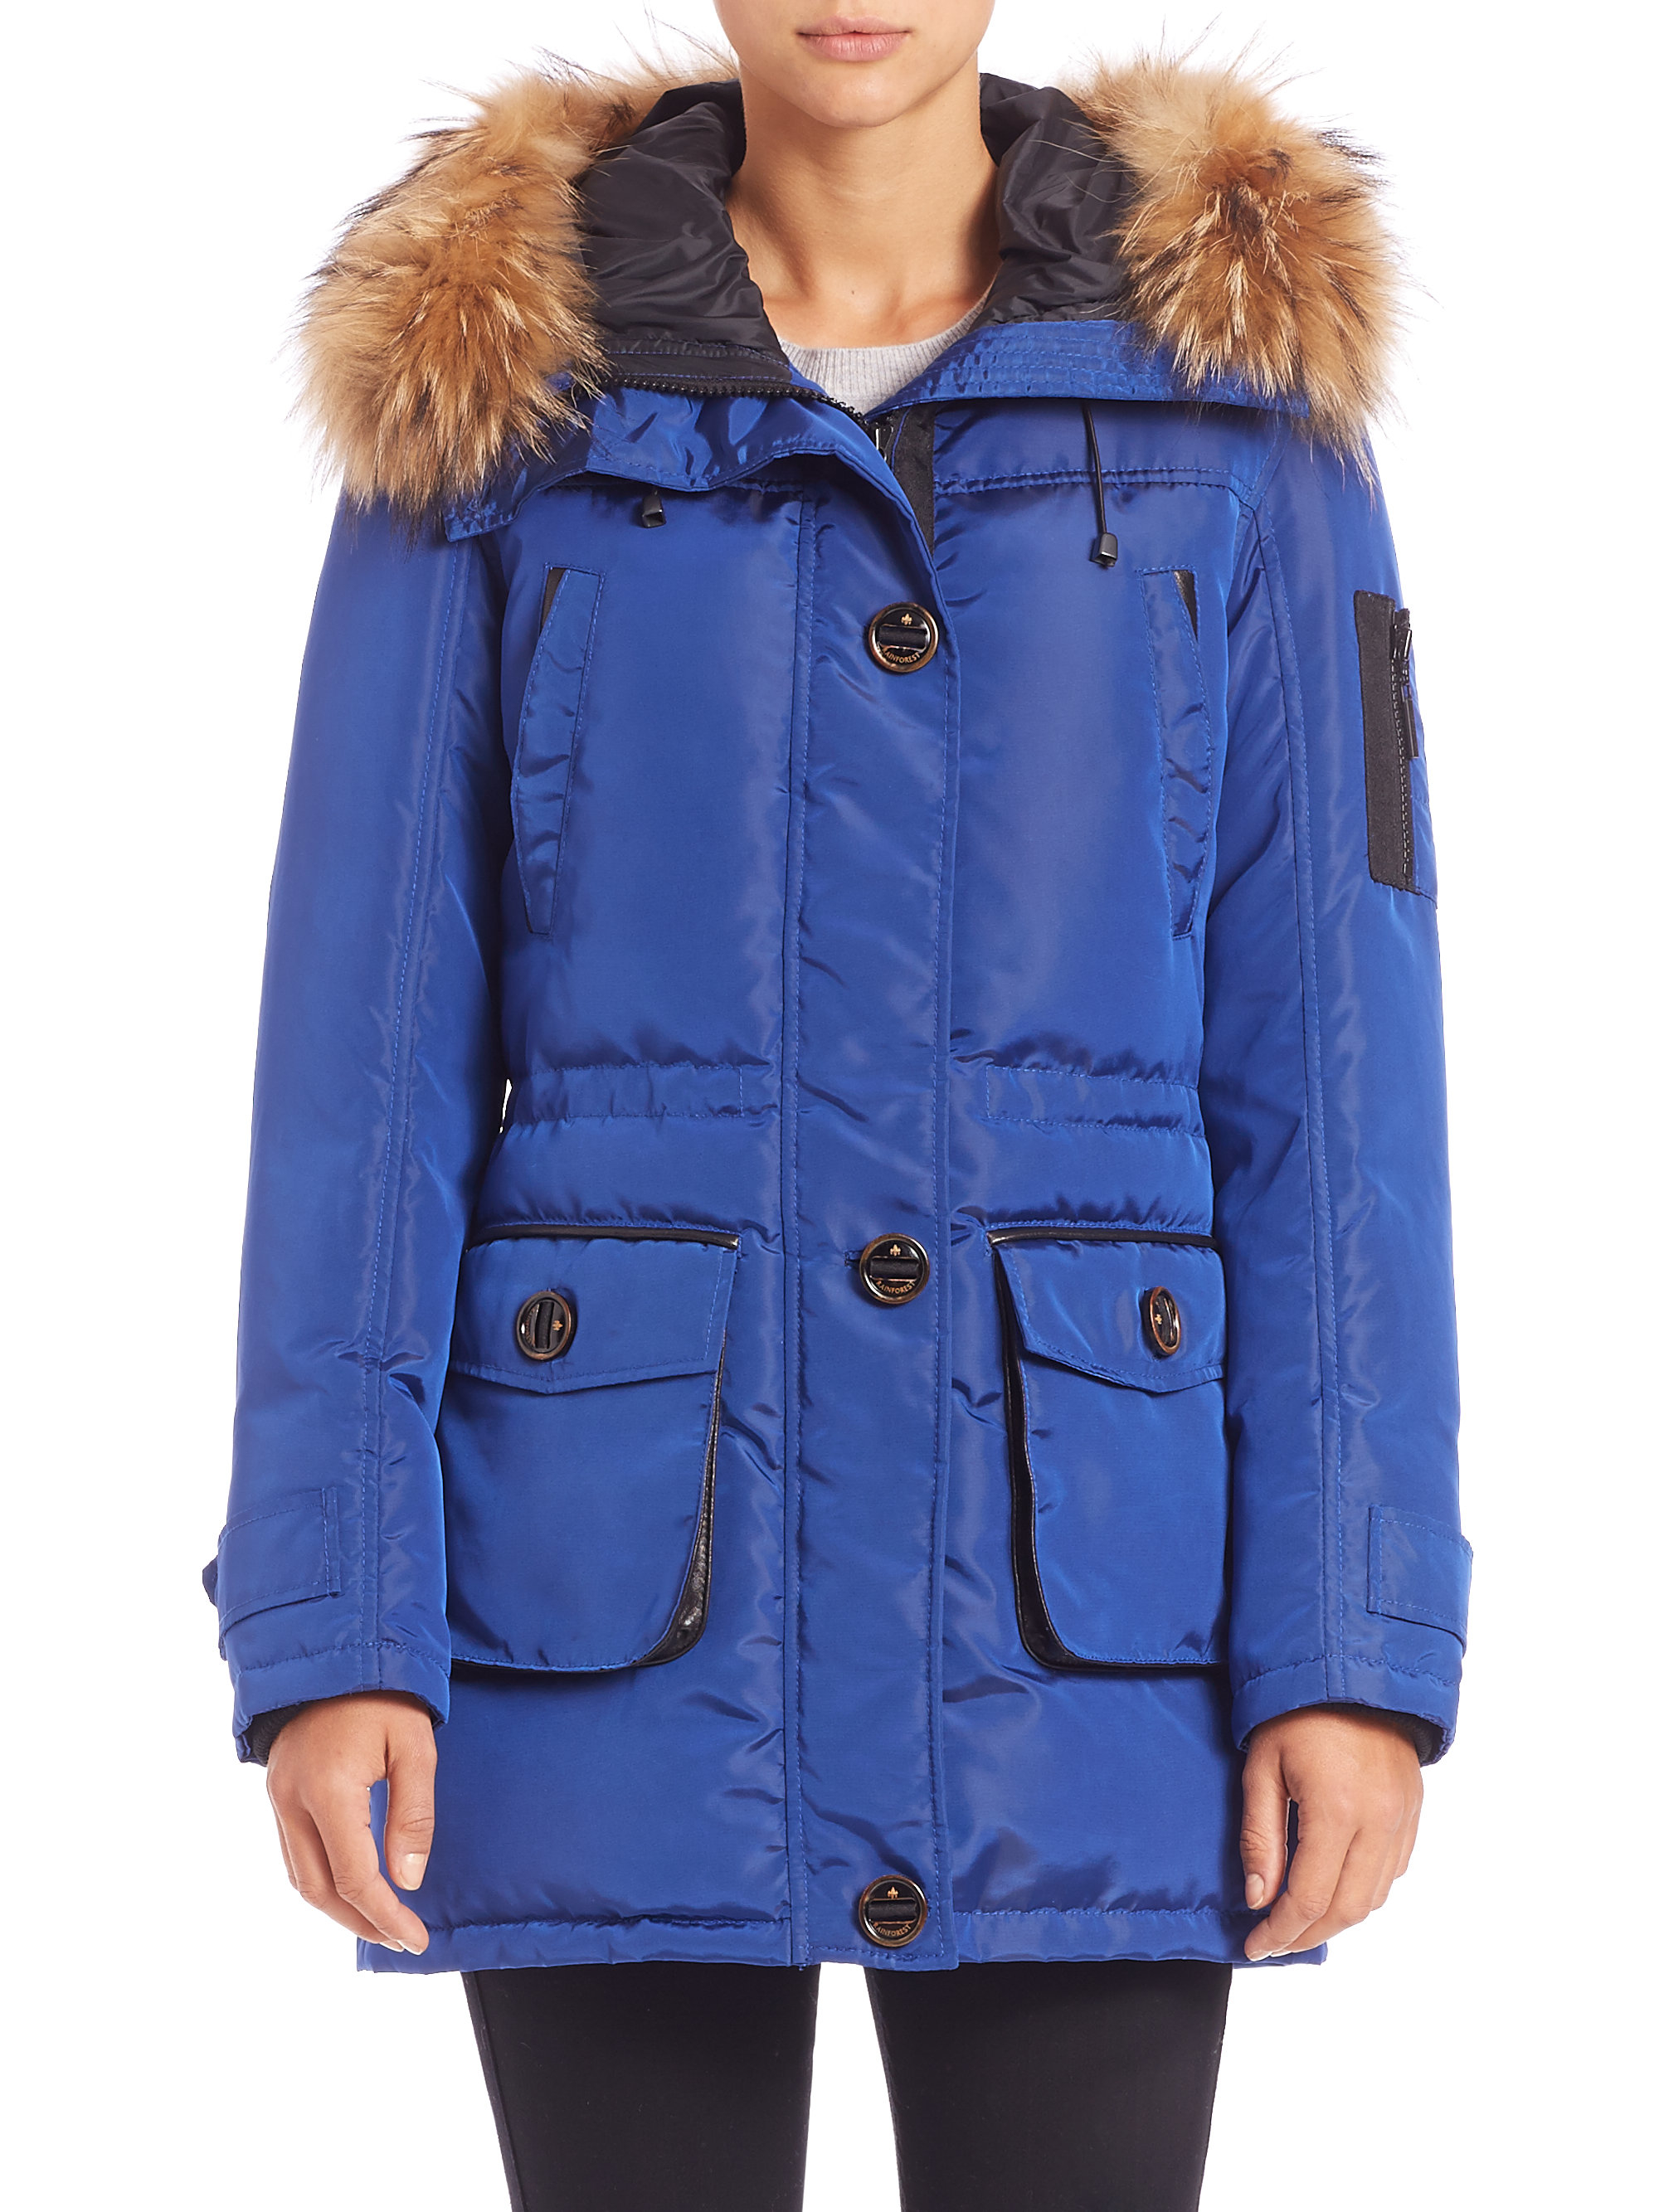 Lyst - Rainforest Thermoluxe Mixed Media Jacket in Blue